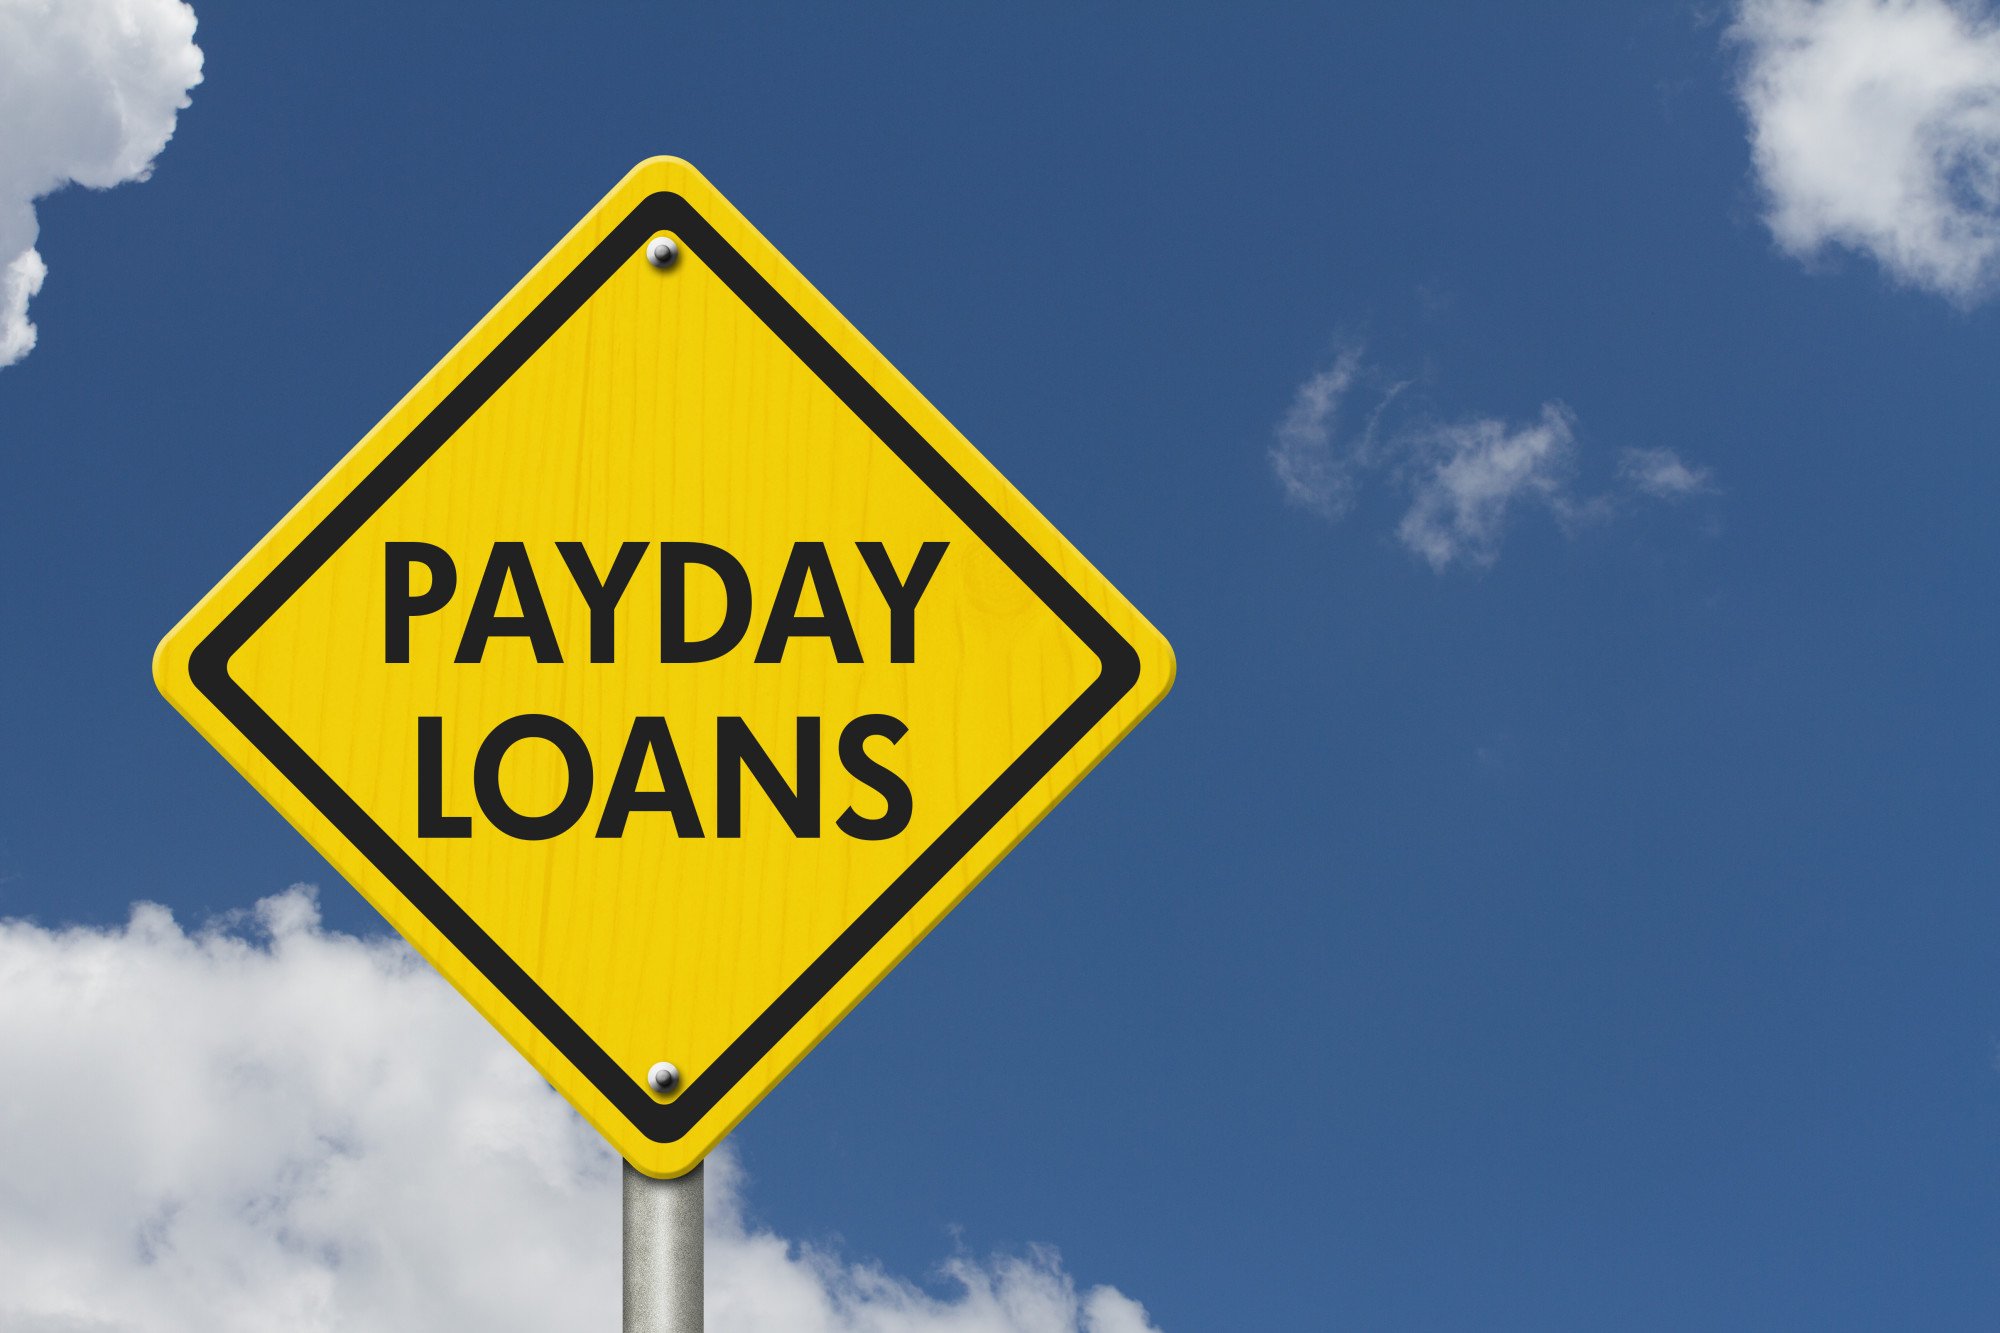 Payday loans interest rate